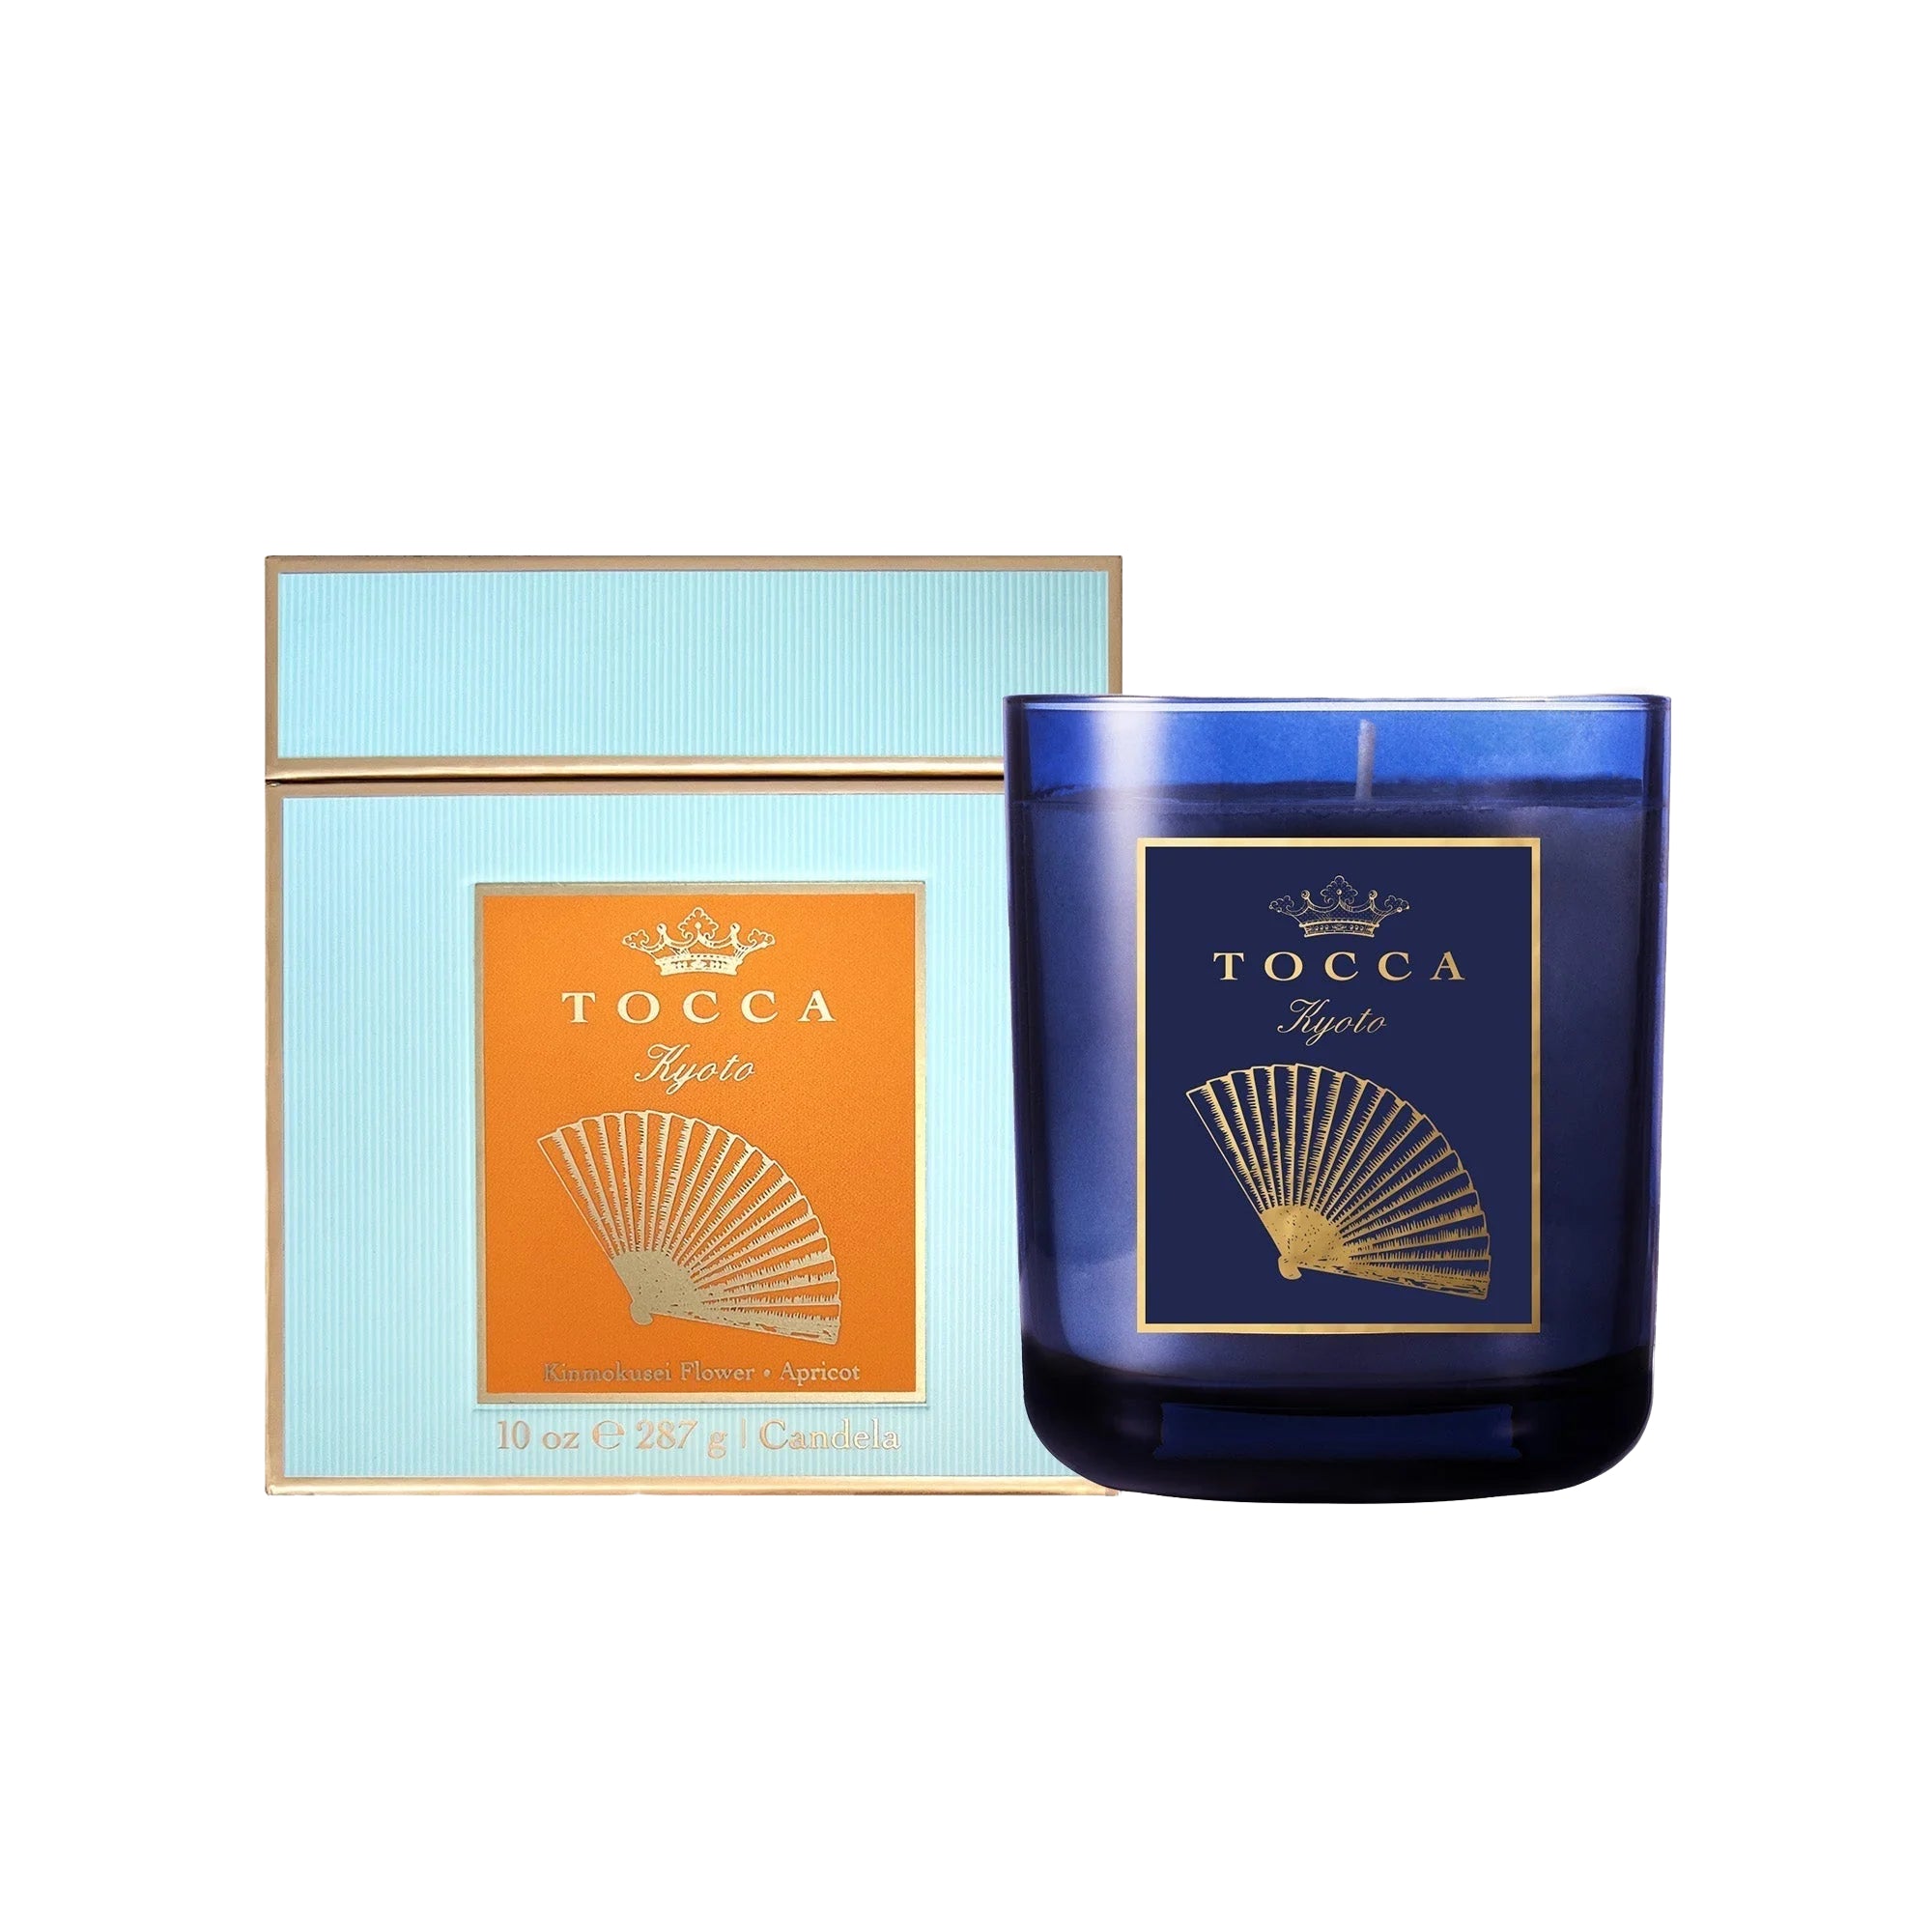 Tocca Candela Classica Kyoto Scented Candle – 10oz.